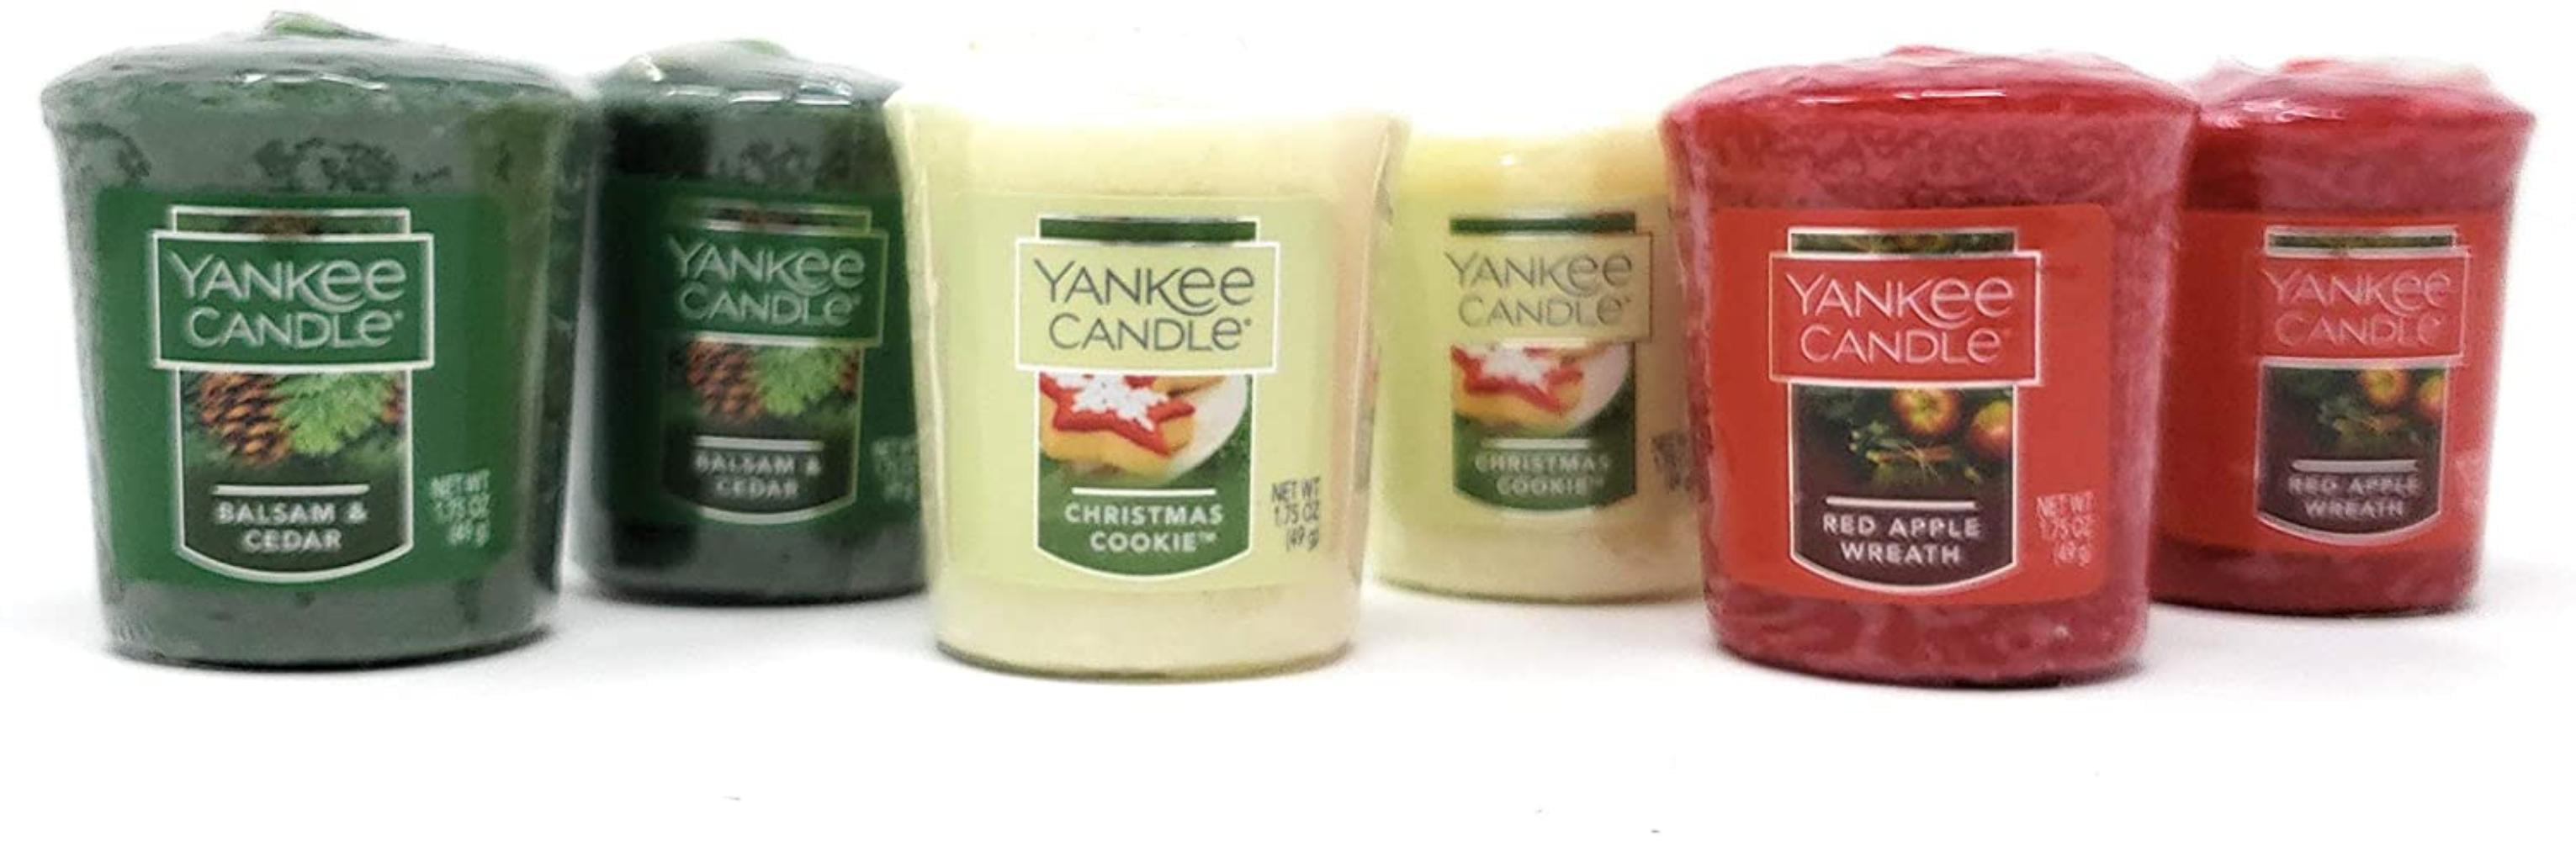 Rare Yankee Candle 1.75 oz Small Sampler Votive Scented Mini Candle 18 piece set 